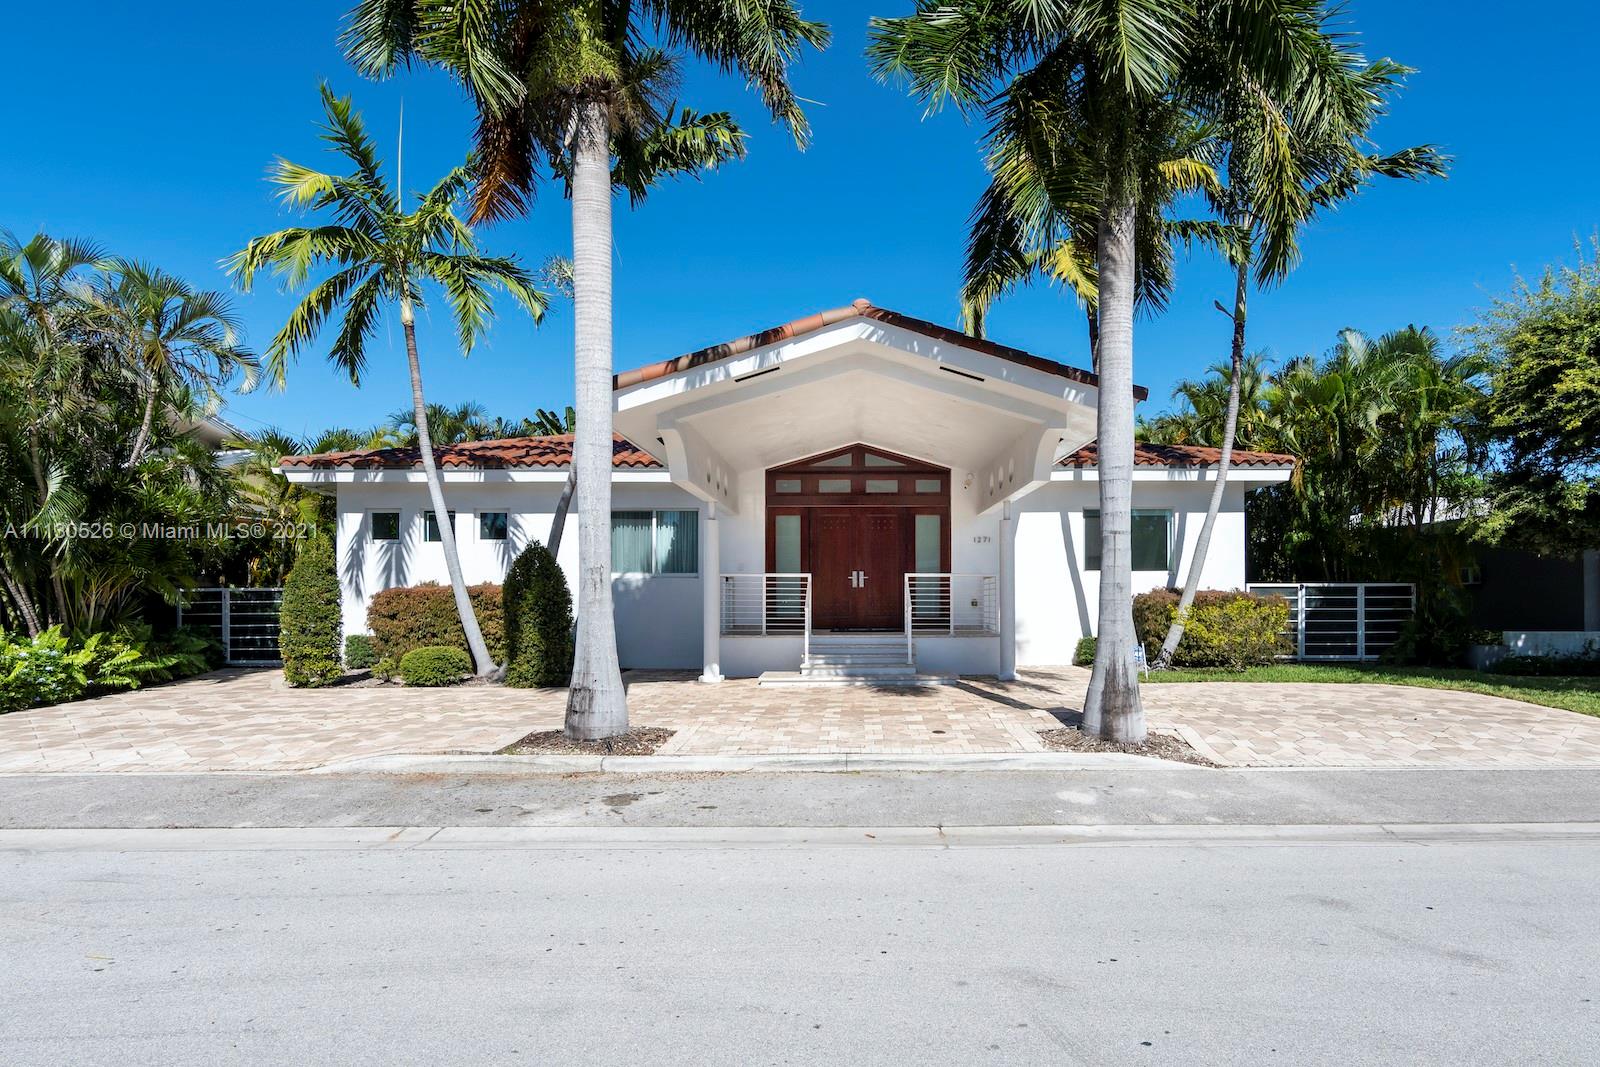 Just listed!! Very bright house with great floor plan featuring 4 bedrooms, 3.5 bathrooms + den and renovated open kitchen and top of the line appliances. Large backyard with salt water heated pool and beautiful landscaping. This house also has generator and many upgrades. Located walking distance to the beach, restaurants, A+ school, and the famous Bal Harbour Shops.